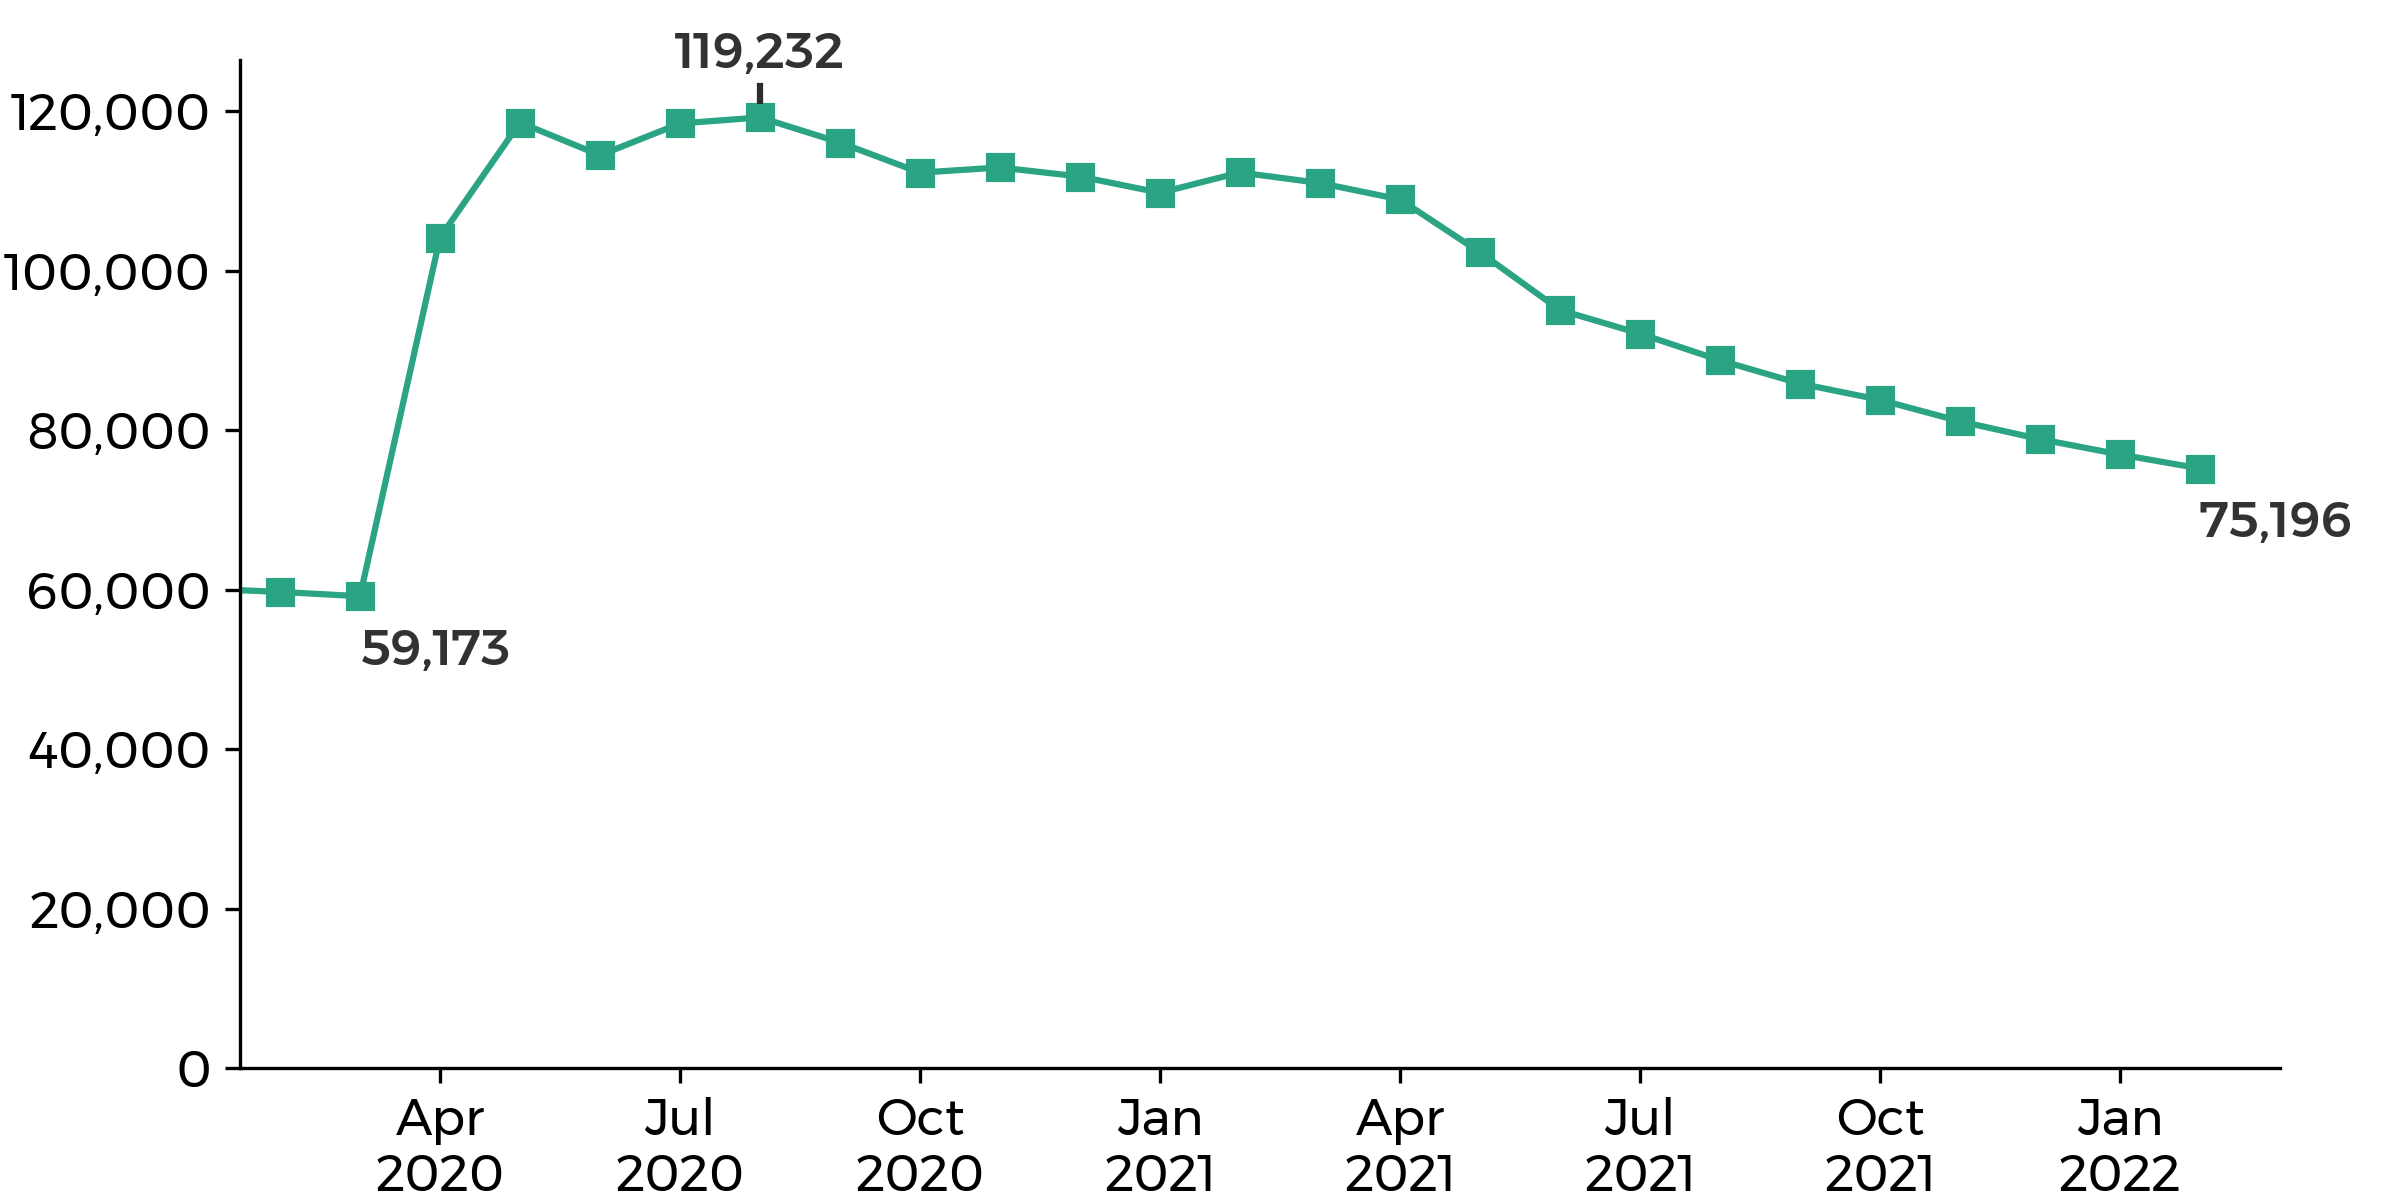 graph showing the Wales claimant count went up from 59,173 in March 2020 to 119,232 in August 2020, then decreasing to 75,196 in February 2022.